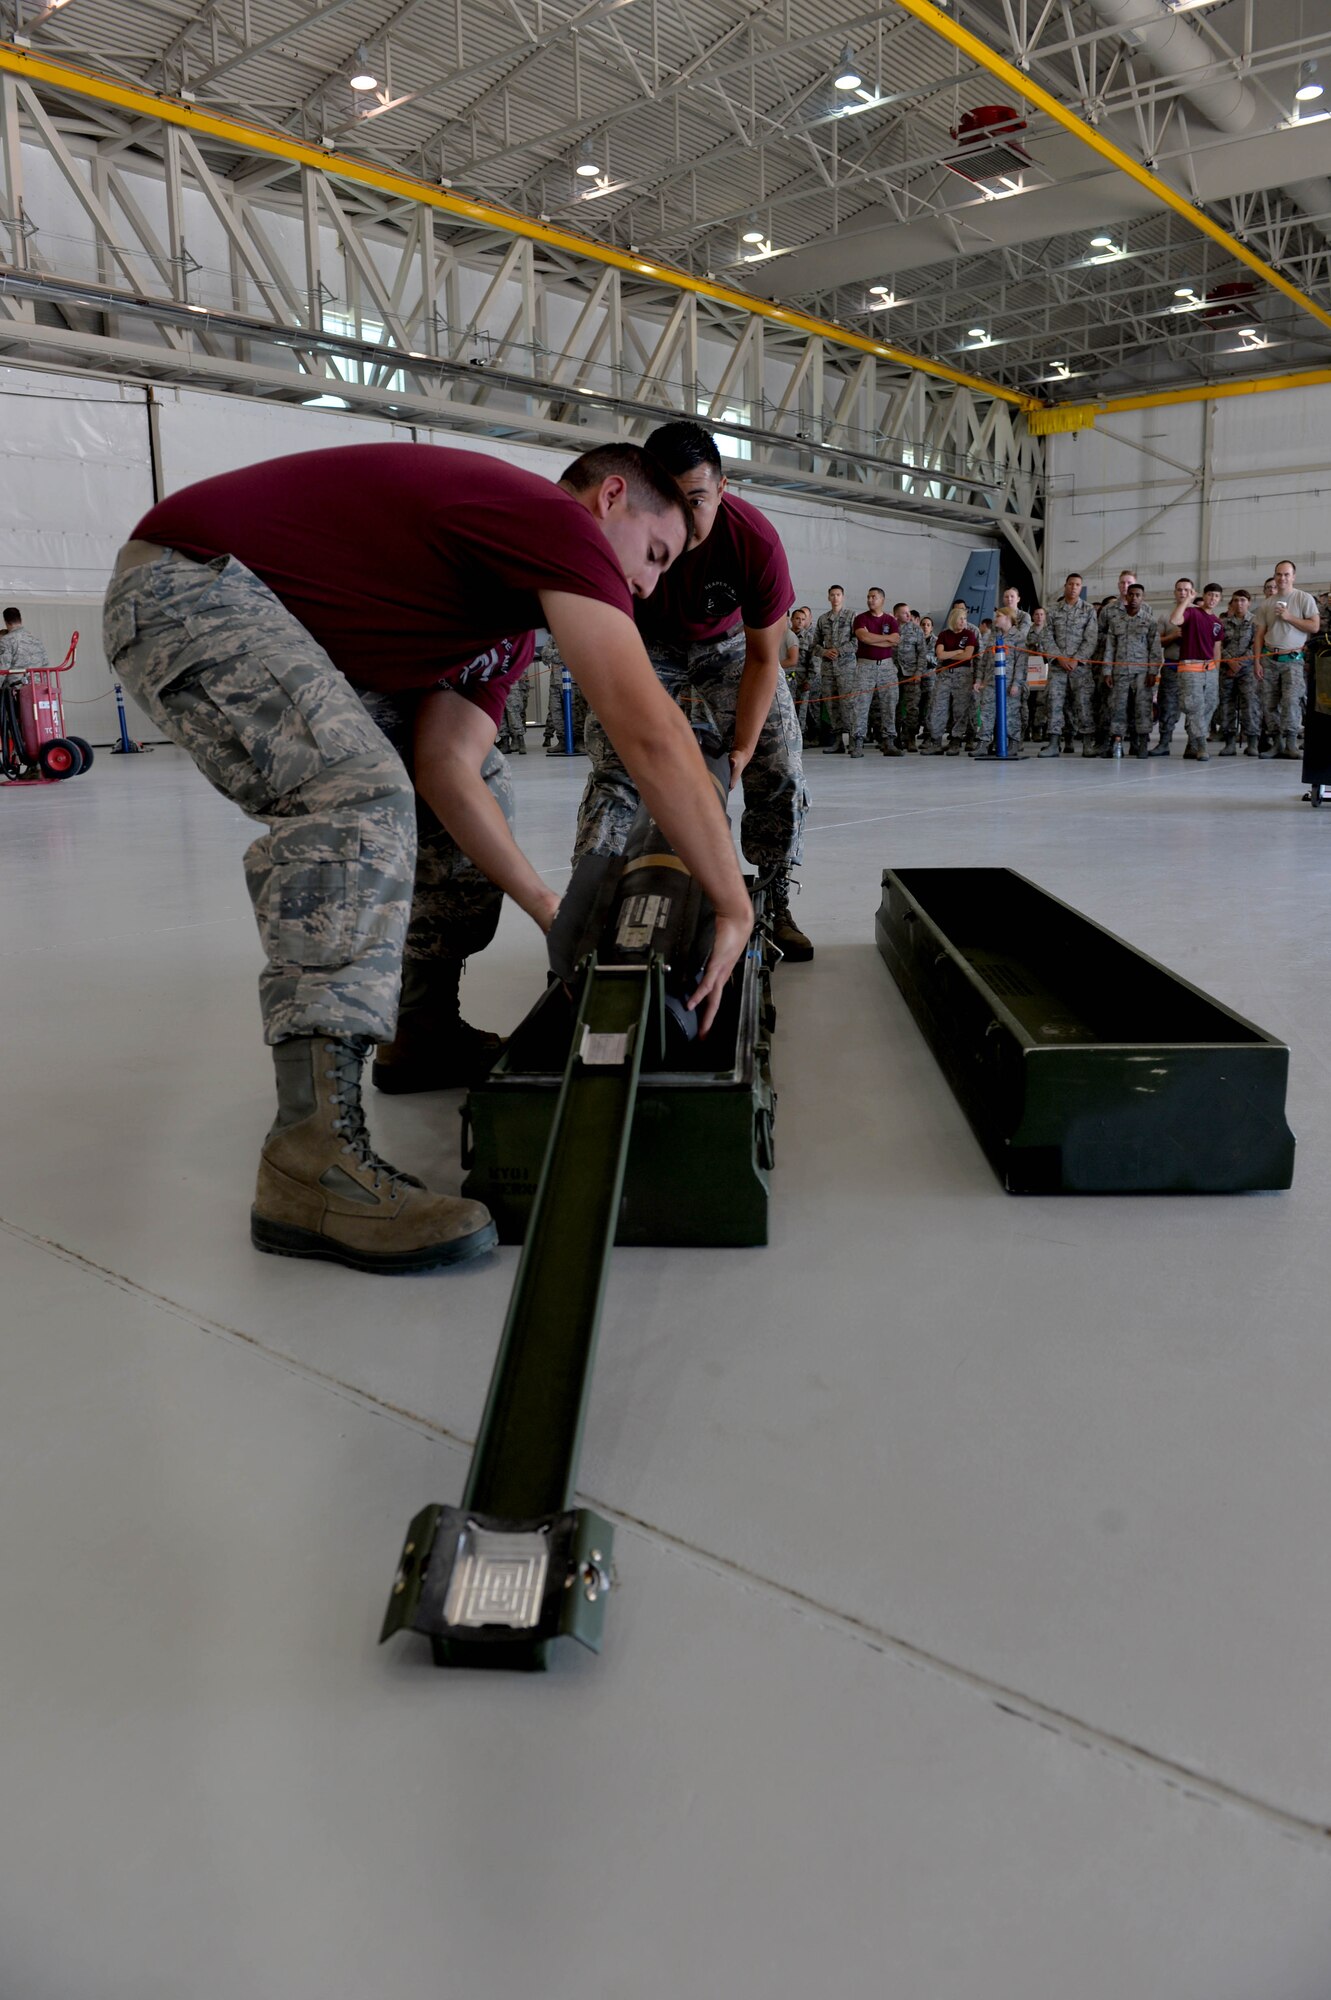 Senior Airman Dustin, 432nd Aircraft Maintenance Squadron load crew chief, and Airman 1st Class Gabriel, 432nd AMXS load crew member, perform a two man munitions movement July 1, 2016, at Creech Air Force Base, Nevada. Teams are given no knowledge of which munitions they will work with during the load, meaning that each team must visit the weapons standardization section to train and keep their skills sharpened for the competition. (U.S. Air Force photo by Airman 1st Class Kristan Campbell)